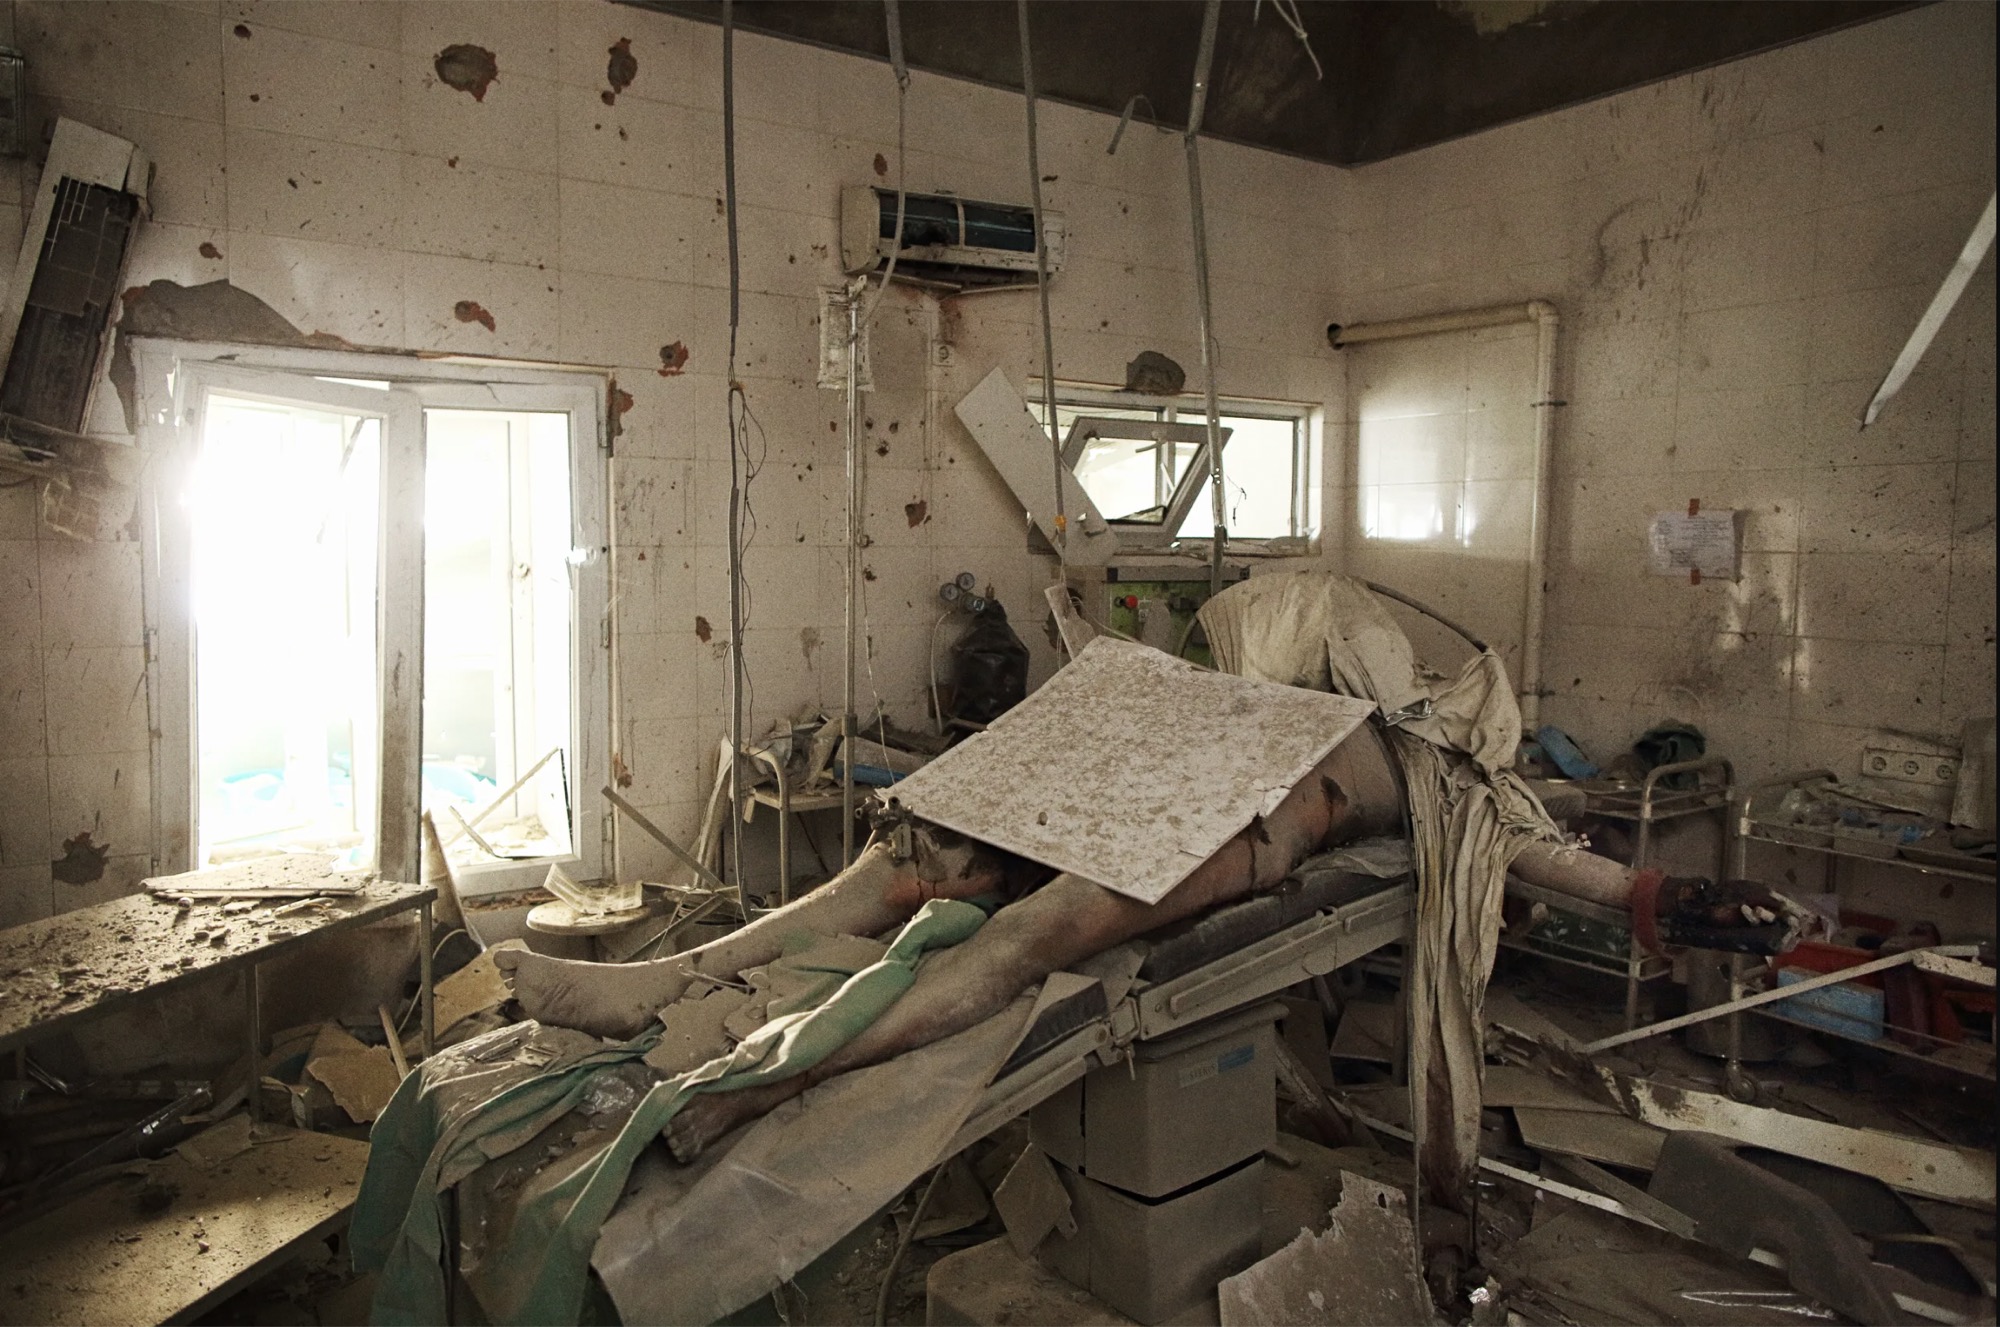 The remains of Baynazar Mohammad Nazar, the man on the operating table. Kunduz, Afghanistan, 2015. Photo: Andrew Quilty